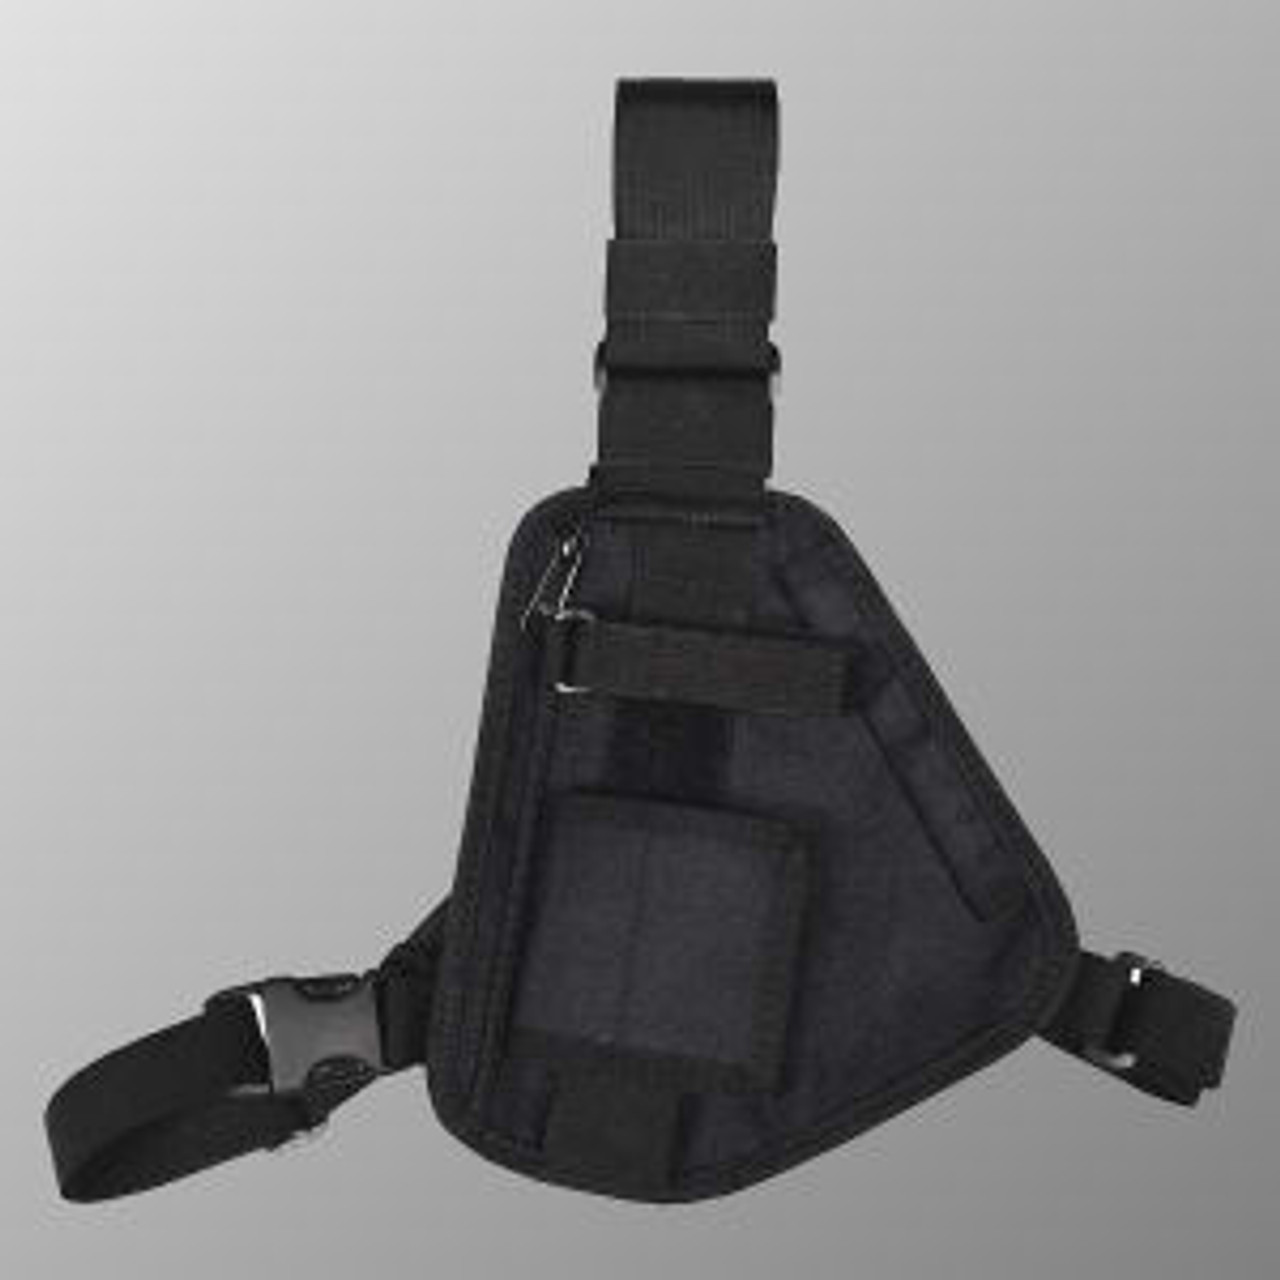 Relm RPU516 3-Point Chest Harness - Black